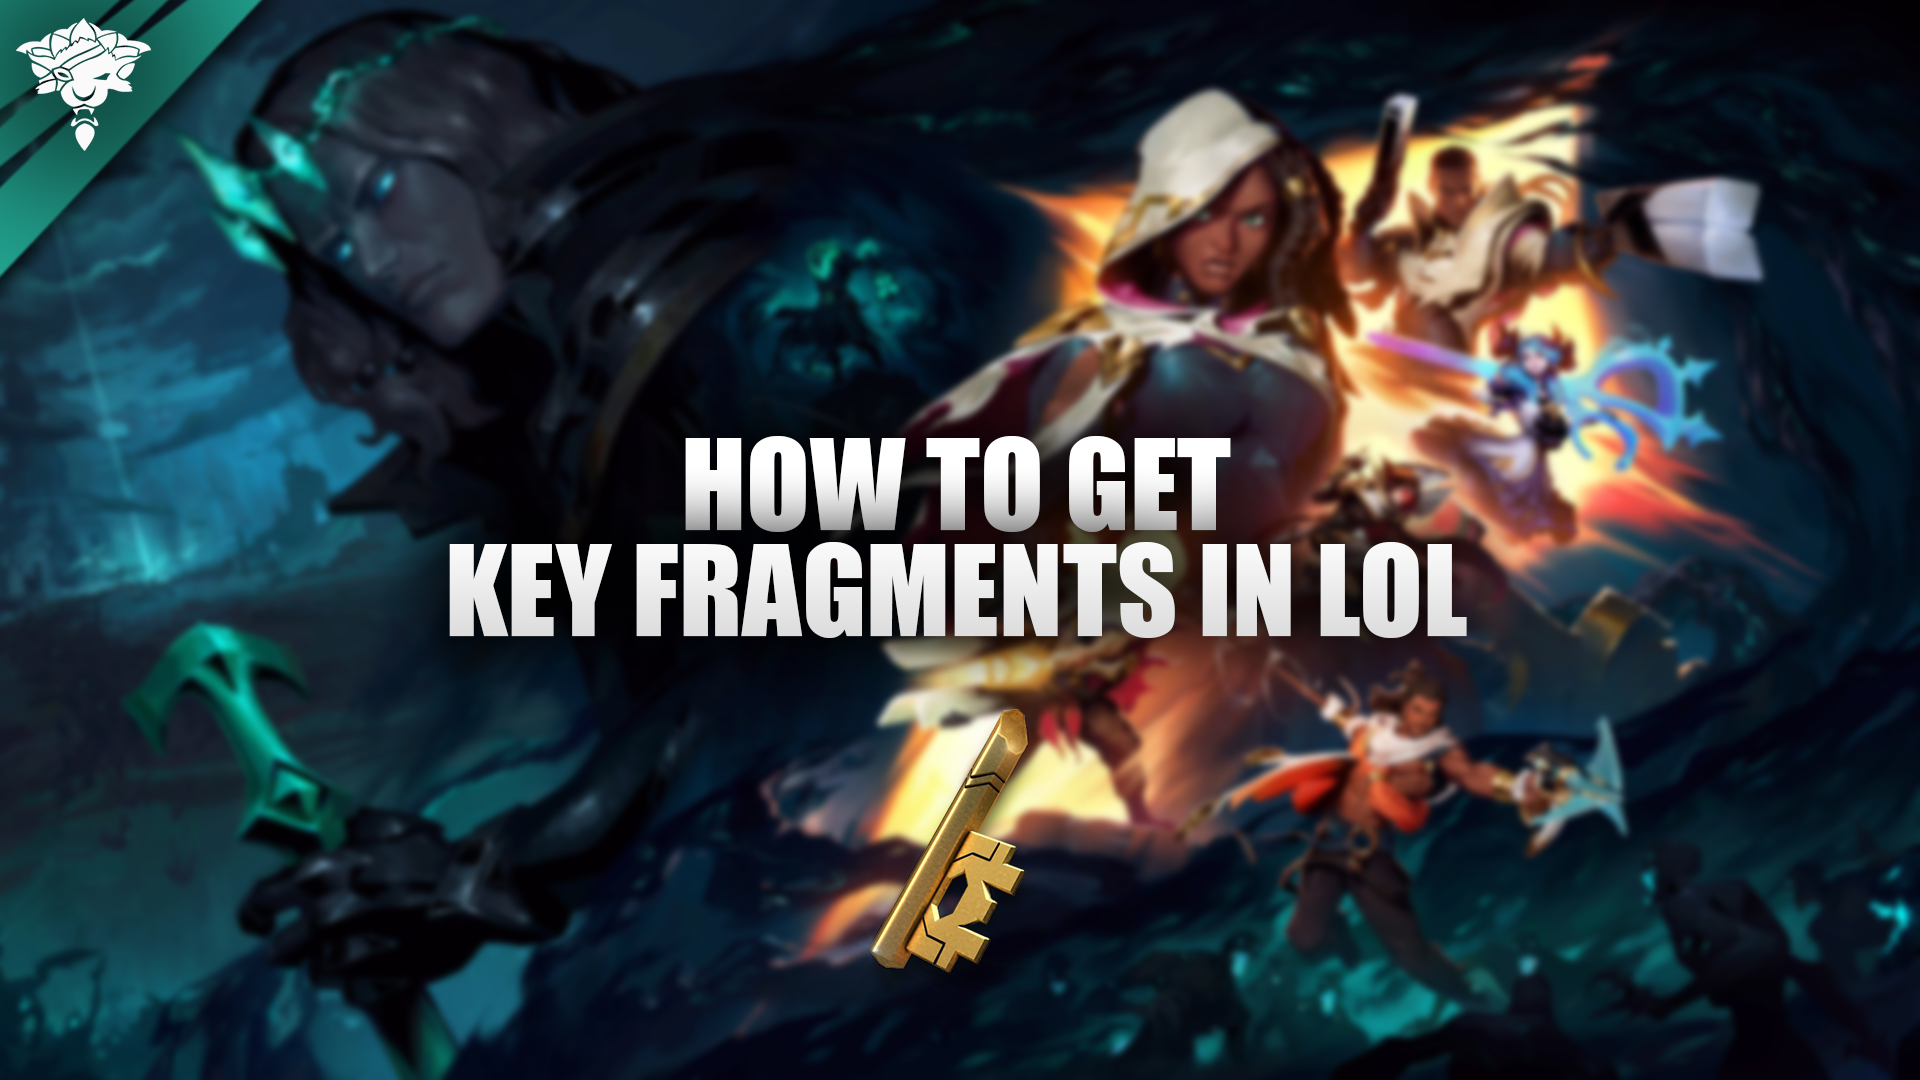 How To Get Key Fragments in League of Legends